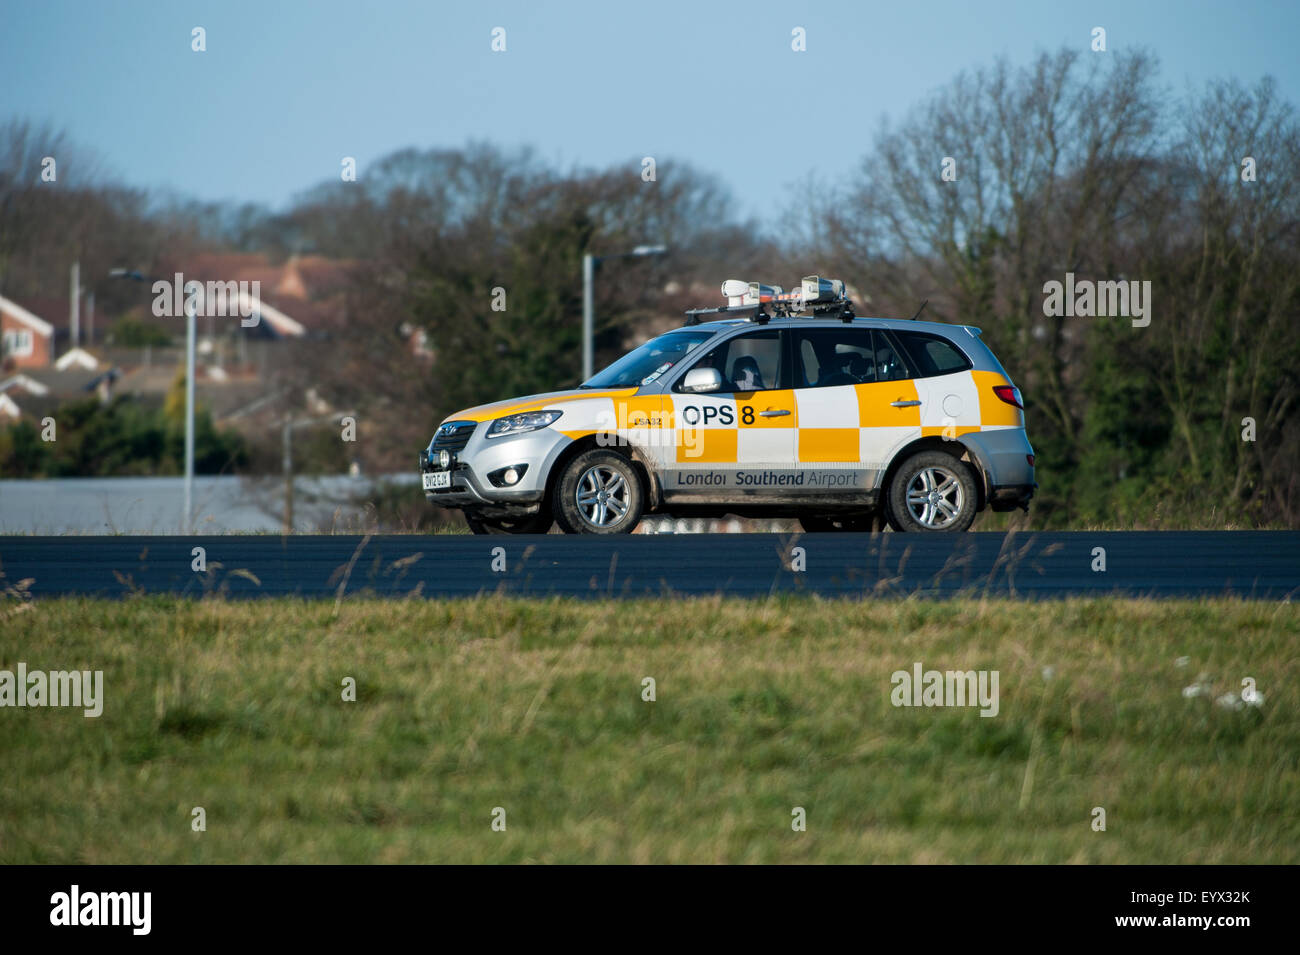 A bird scaring vehicle on the runway at London Southend Airport clearing birds before air traffic lands or takes off. Stock Photo